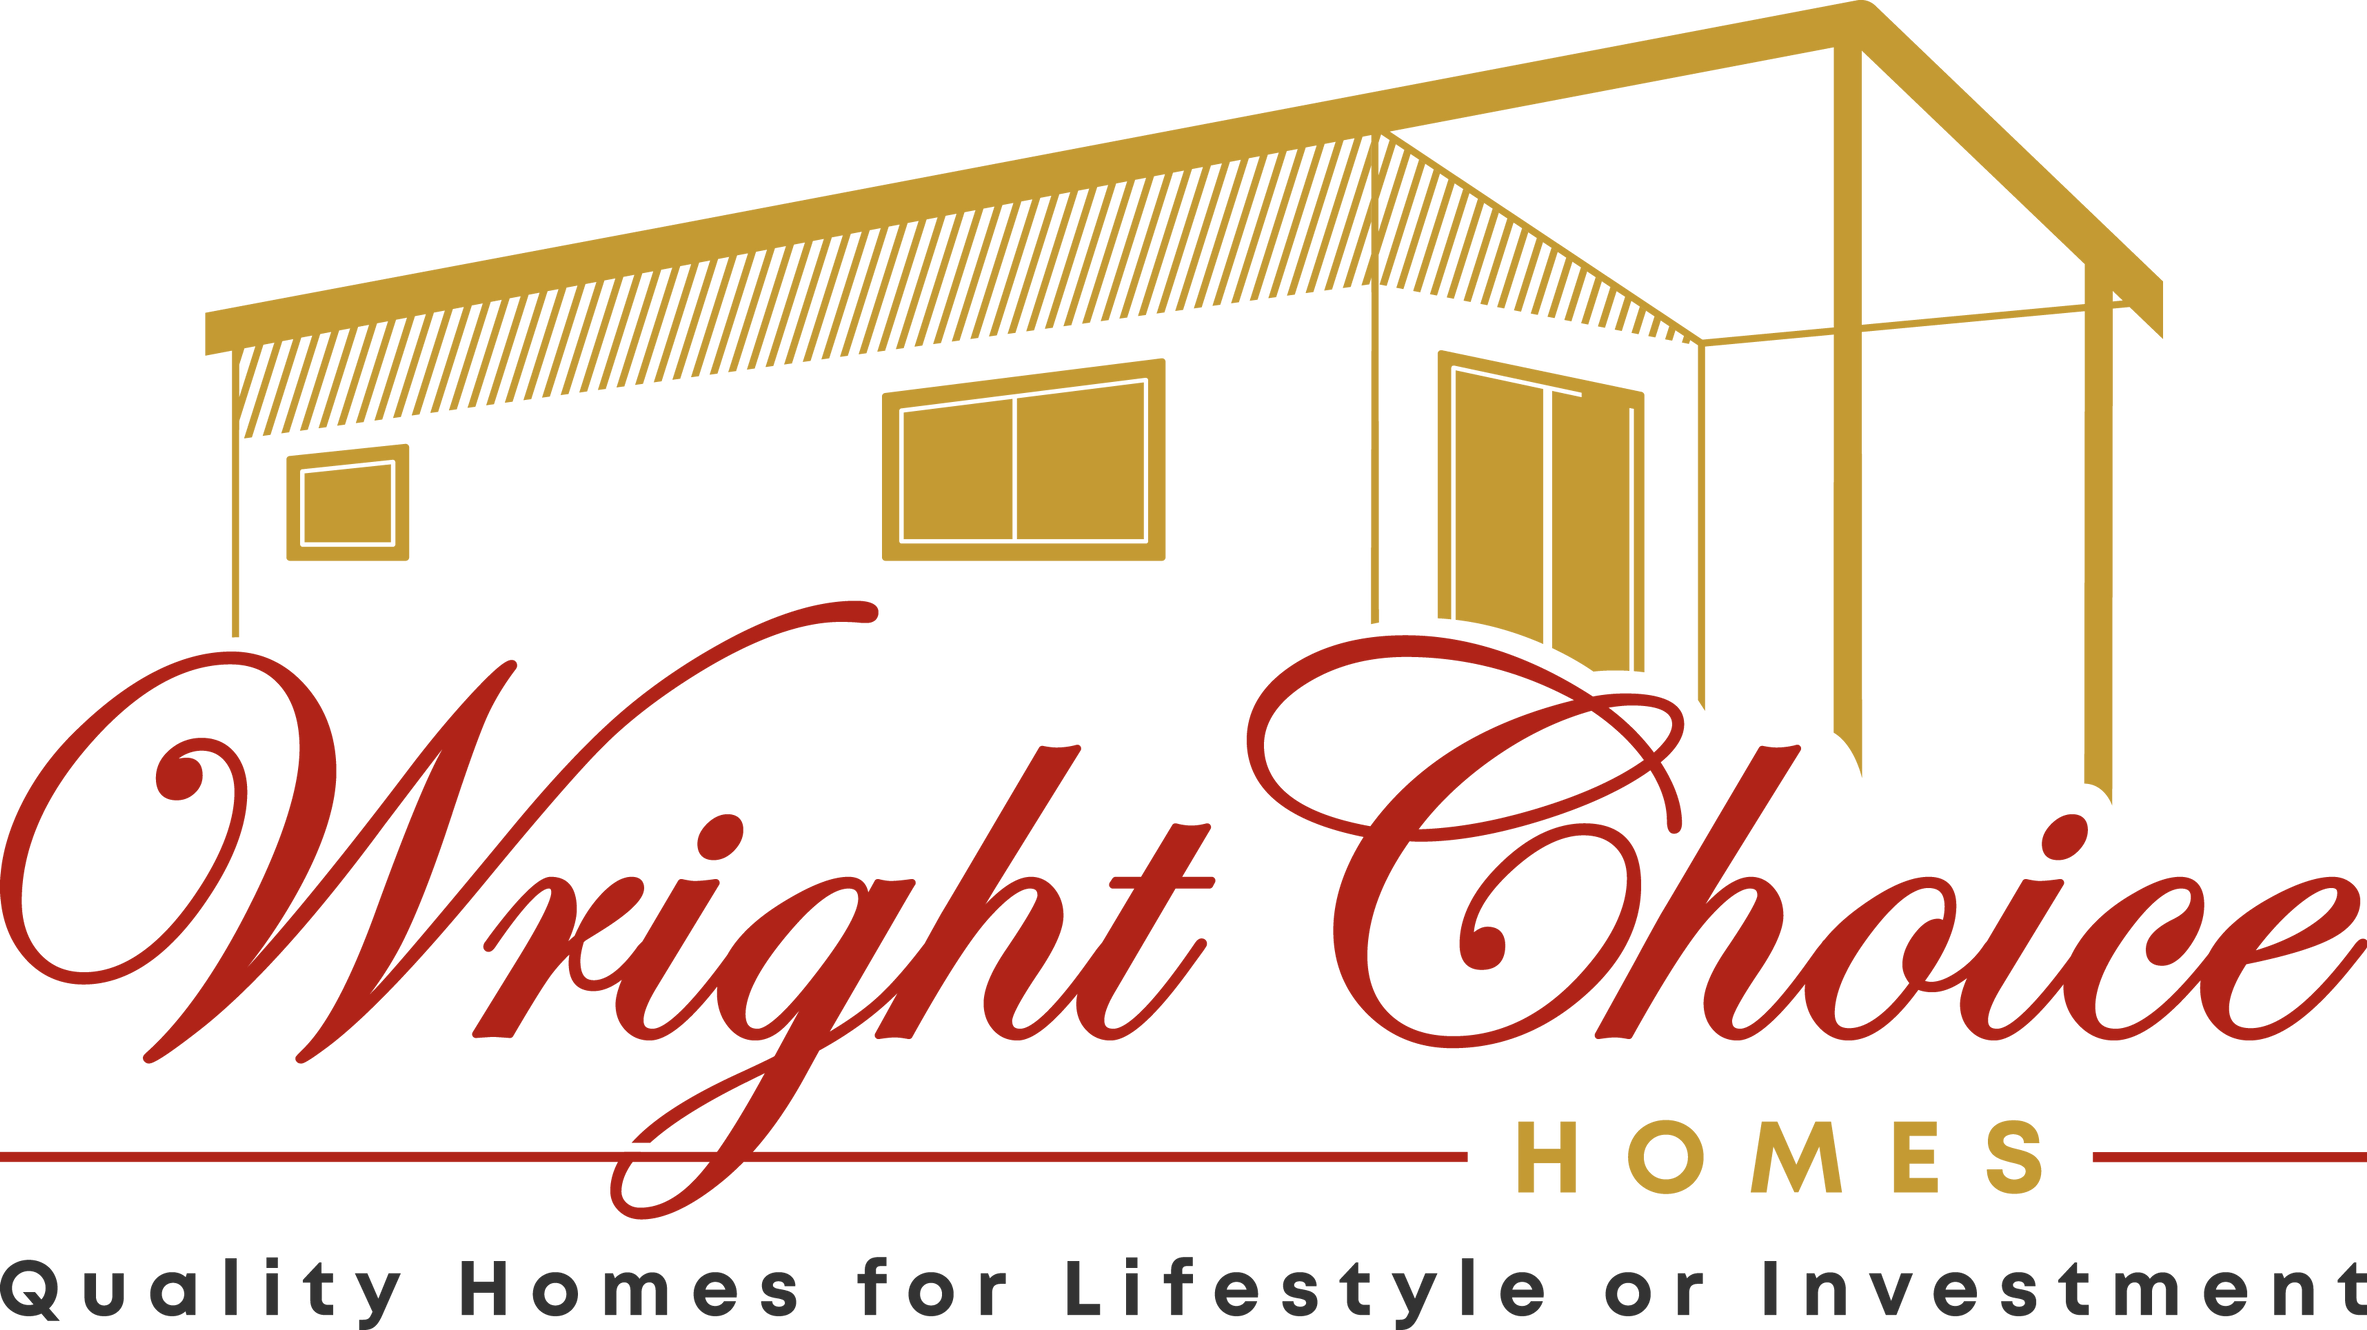 Modular Homes & Granny Flats Builders | Wright Choice Homes | Caboolture